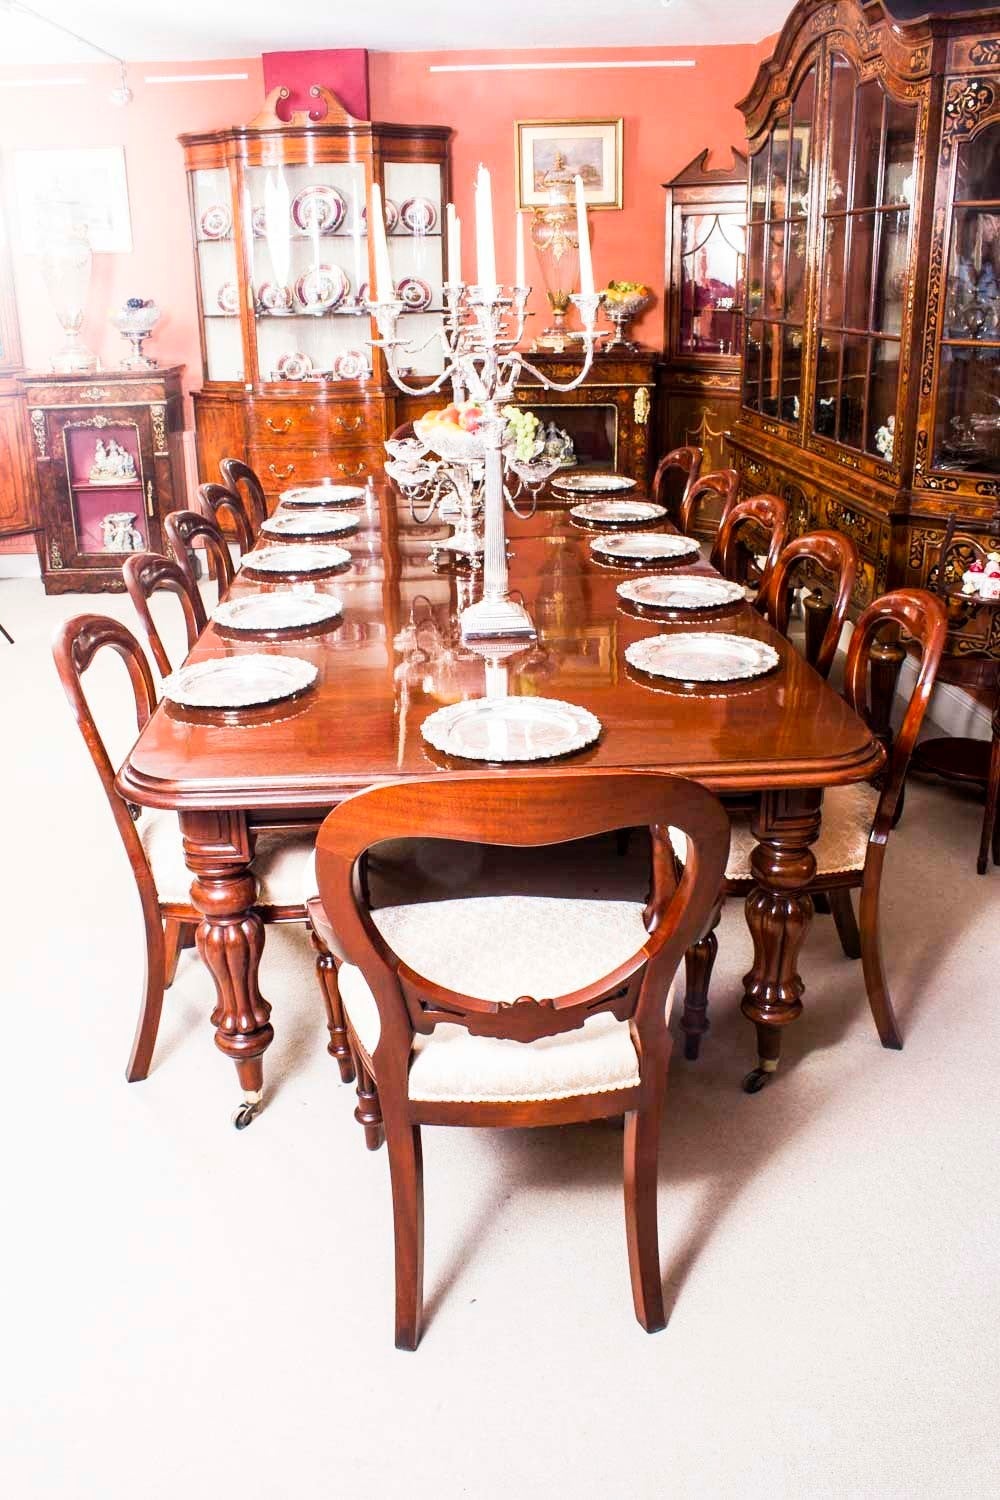 This is a fabulous exquisite English antique early Victorian solid mahogany extending dining table, circa 1840 in date and set of twelve vintage mahogany balloon back dining chairs. 

This amazing table has three original leaves and can